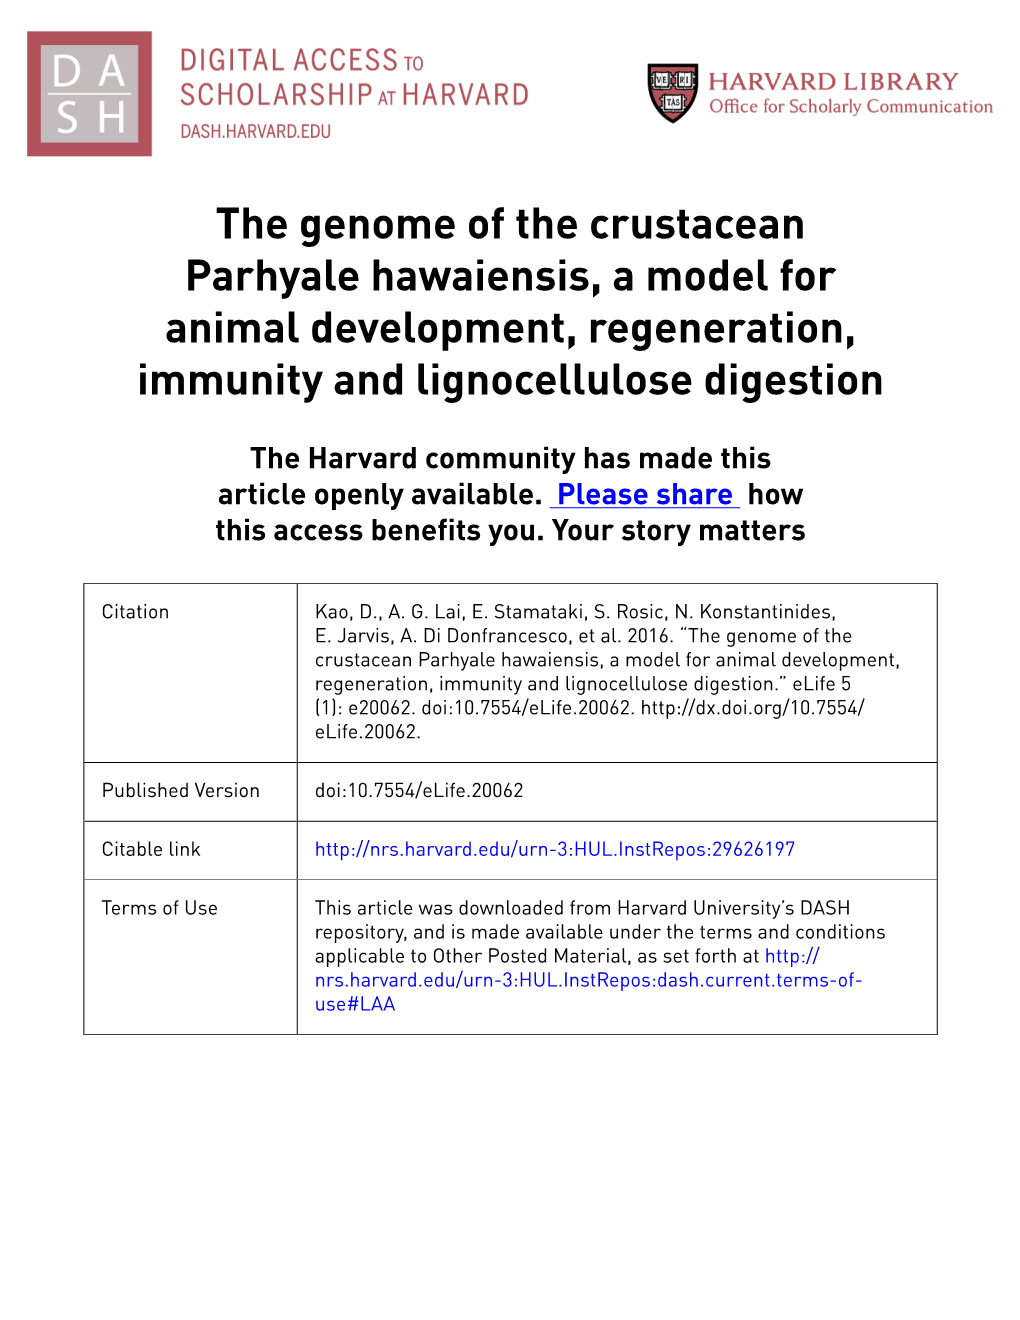 The Genome of the Crustacean Parhyale Hawaiensis, a Model for Animal Development, Regeneration, Immunity and Lignocellulose Digestion